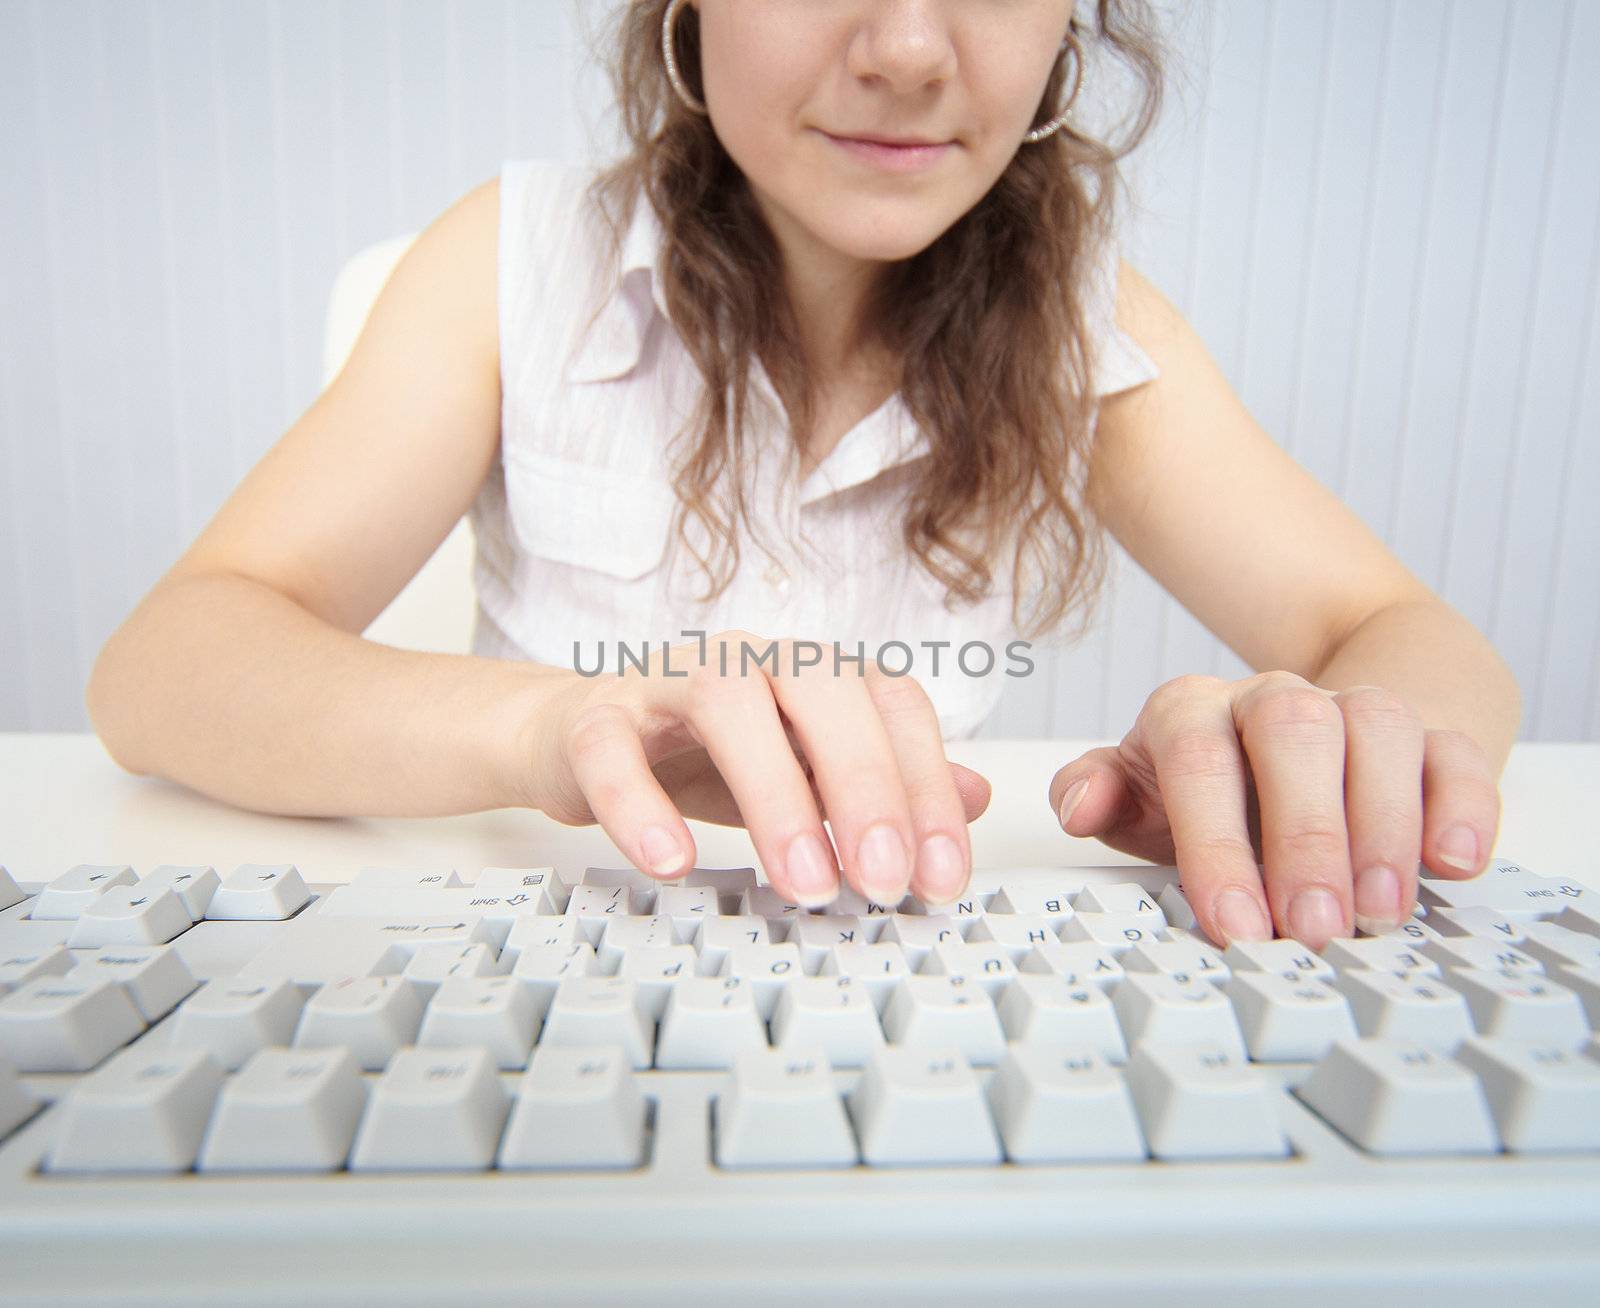 Woman working at computer keyboard by pzaxe